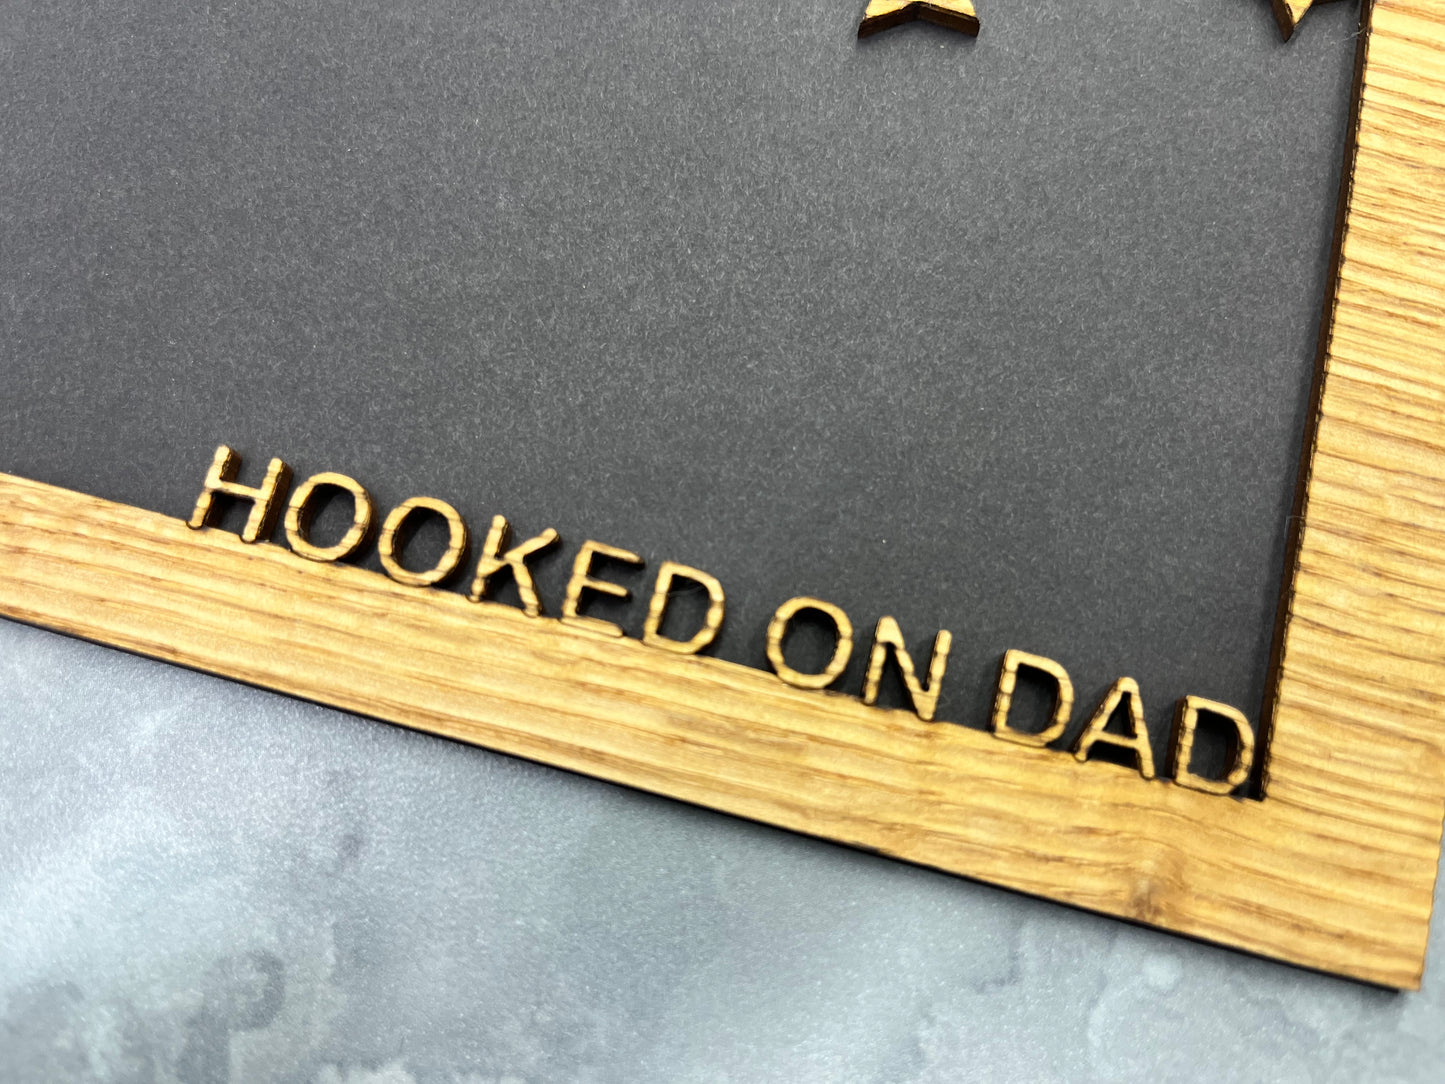 Hooked On Dad Picture Frame - Personalized with Kid's Names